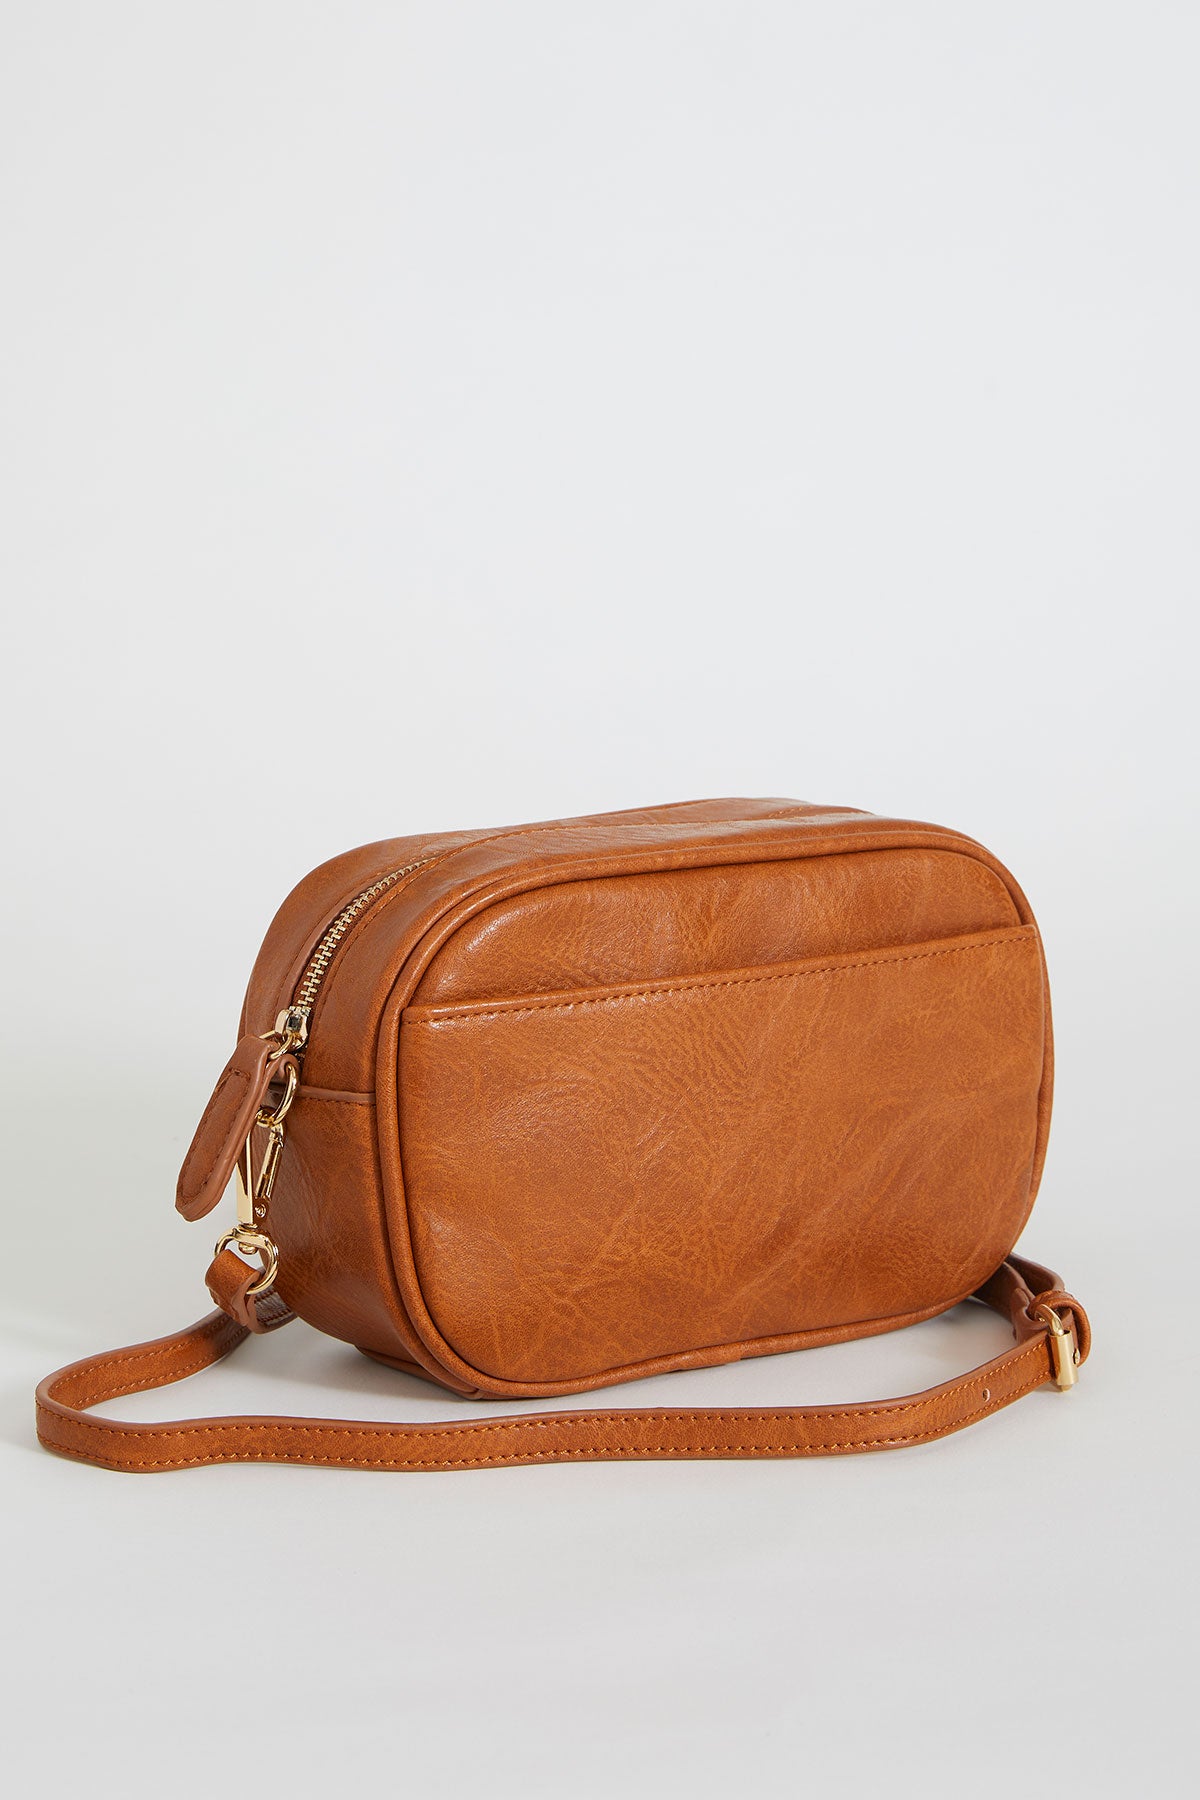 Awesome selection of leather camera bags and accessories. – Vida